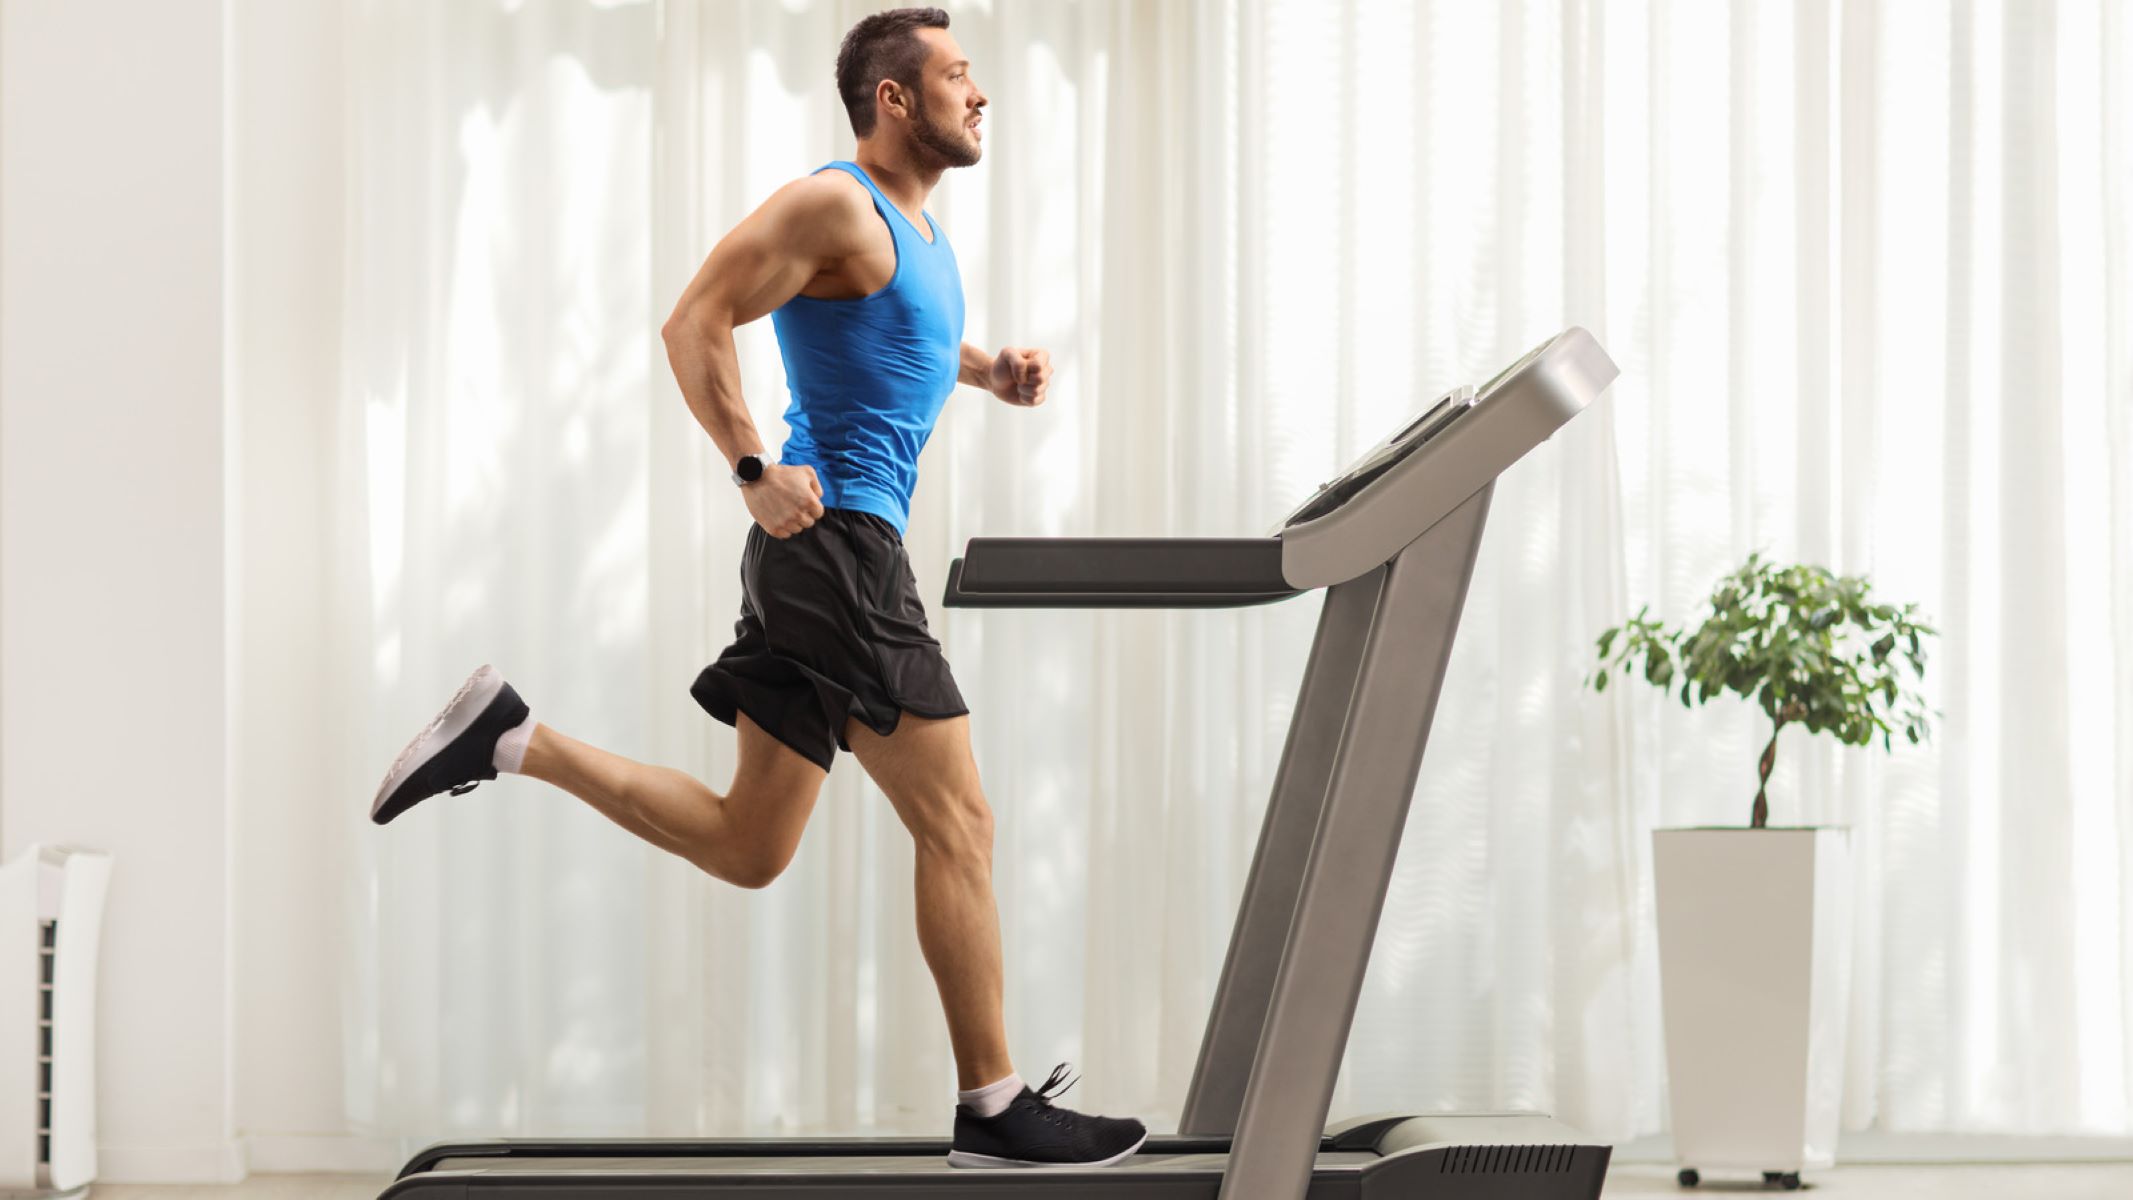 How To Read The Numbers On A Treadmill